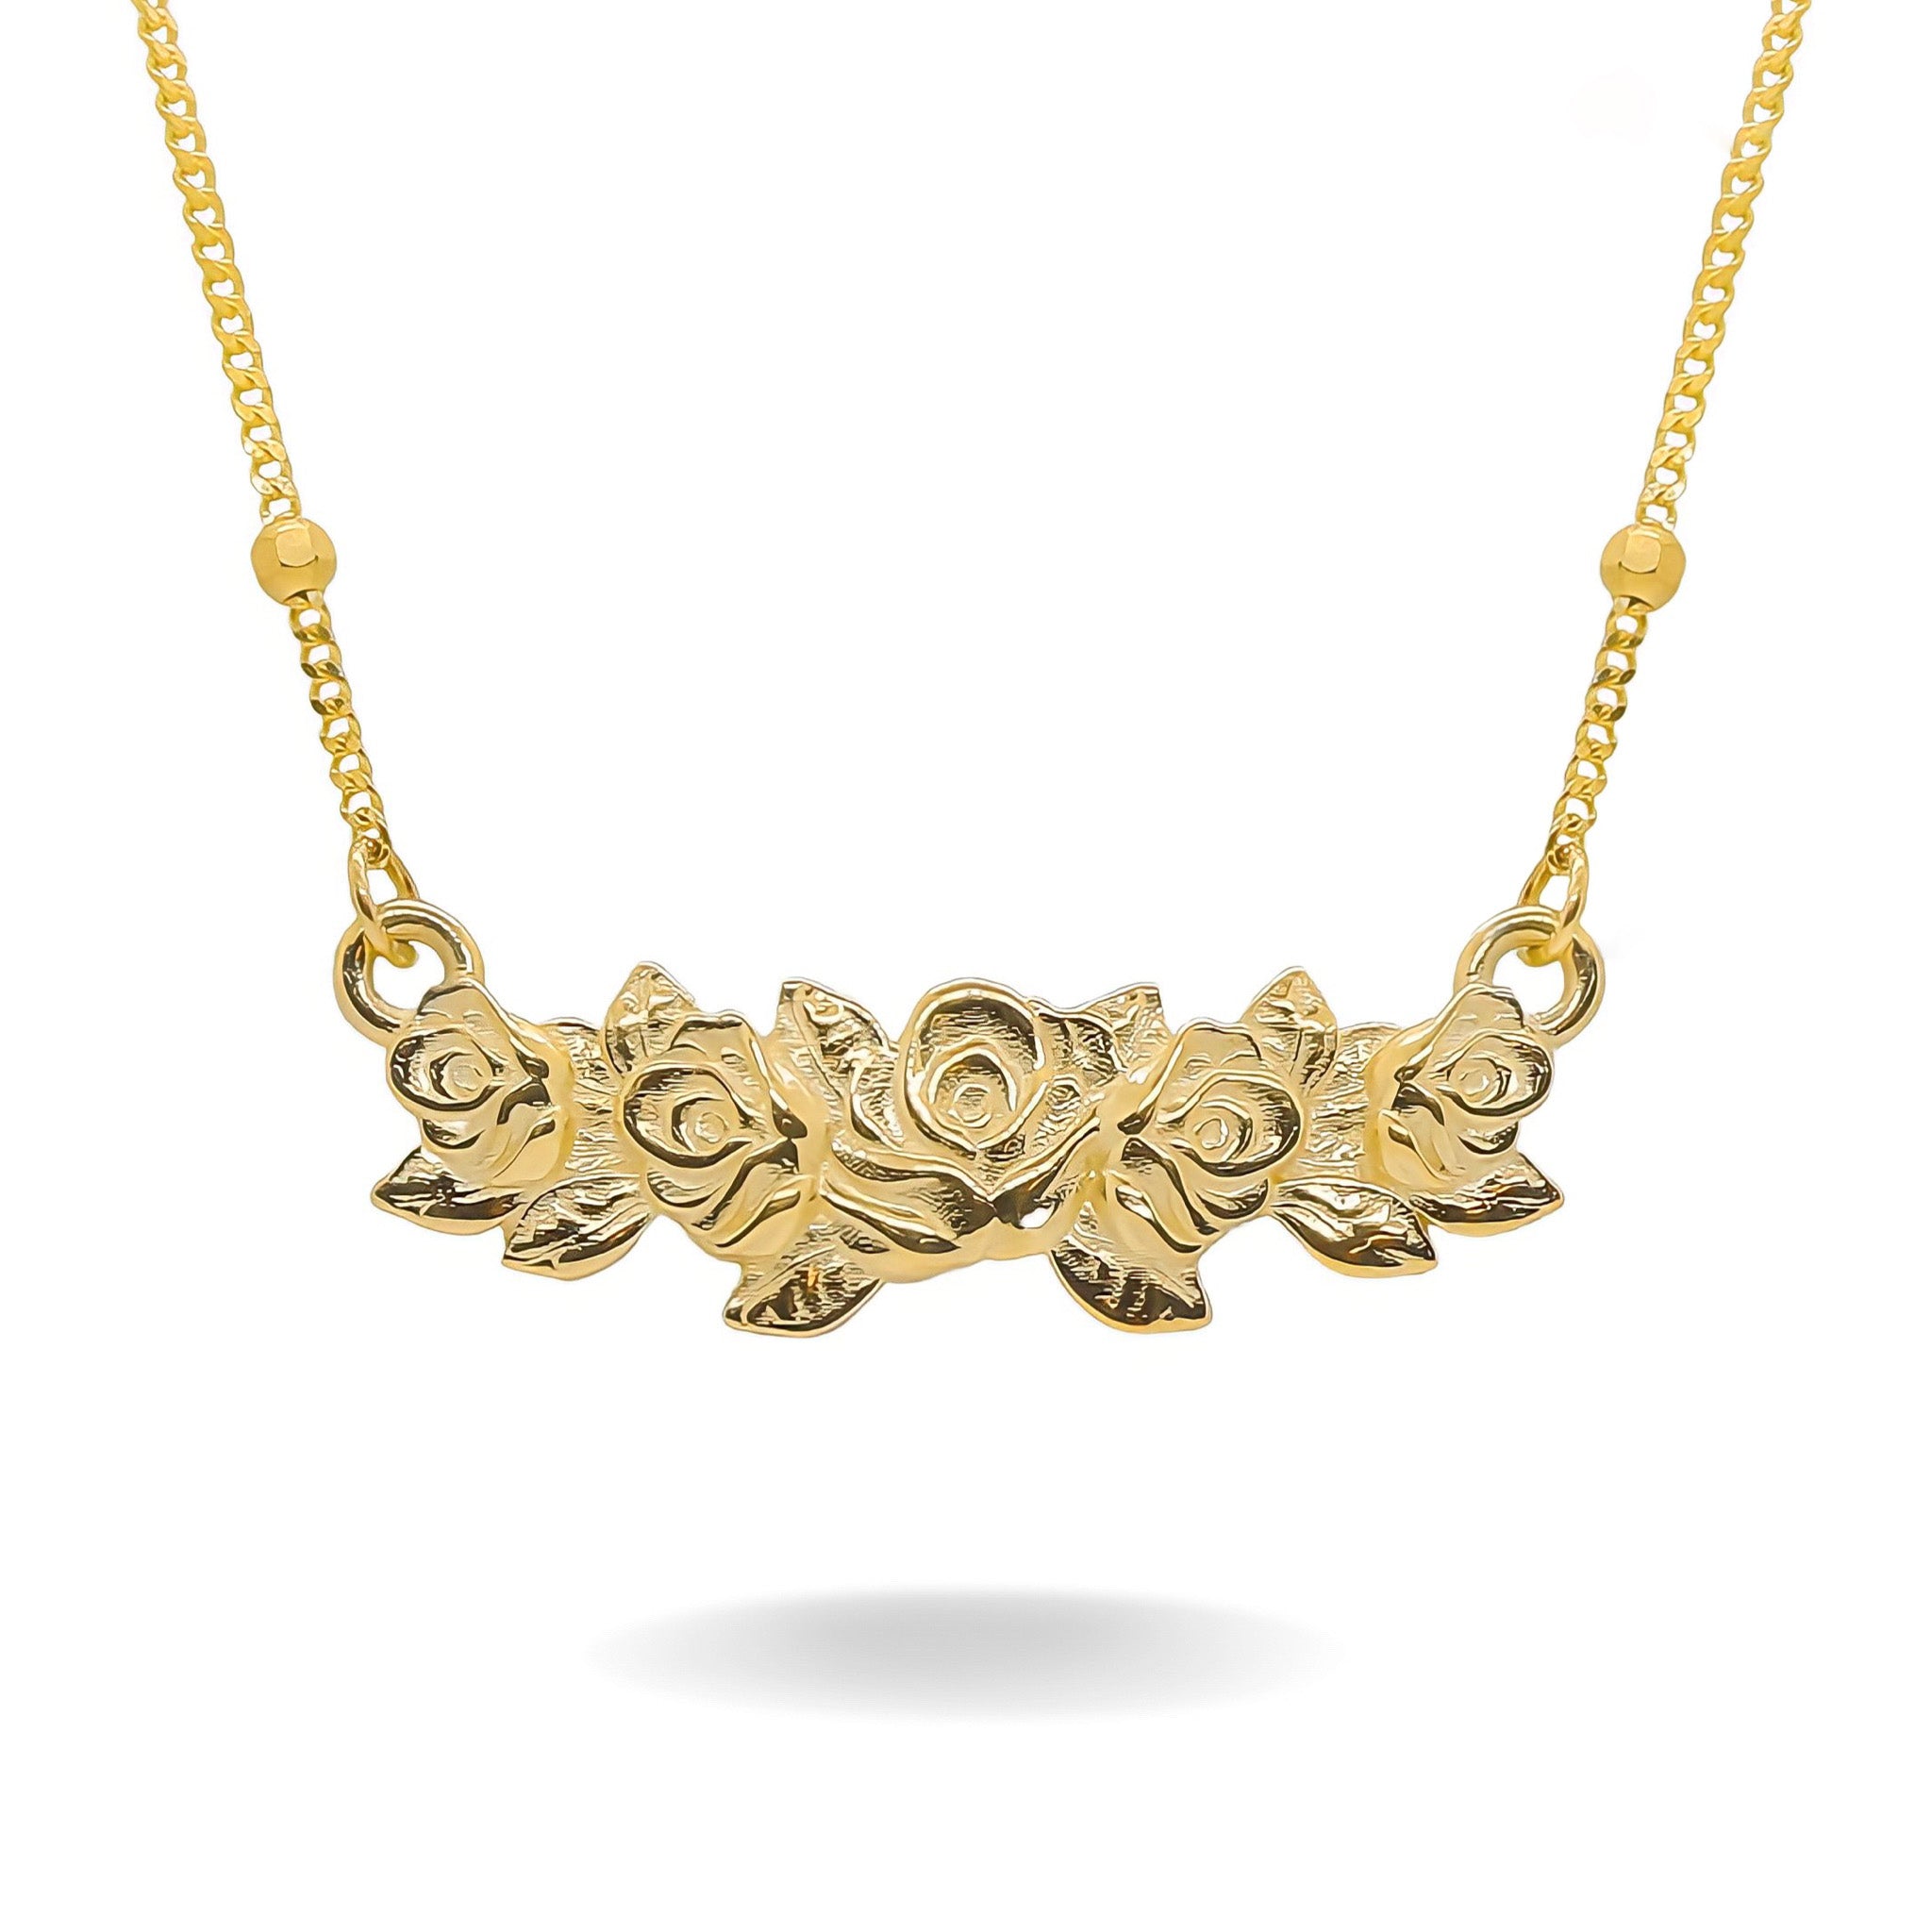 14K YELLOW GOLD BED OF ROSES BEADED NECKLACE